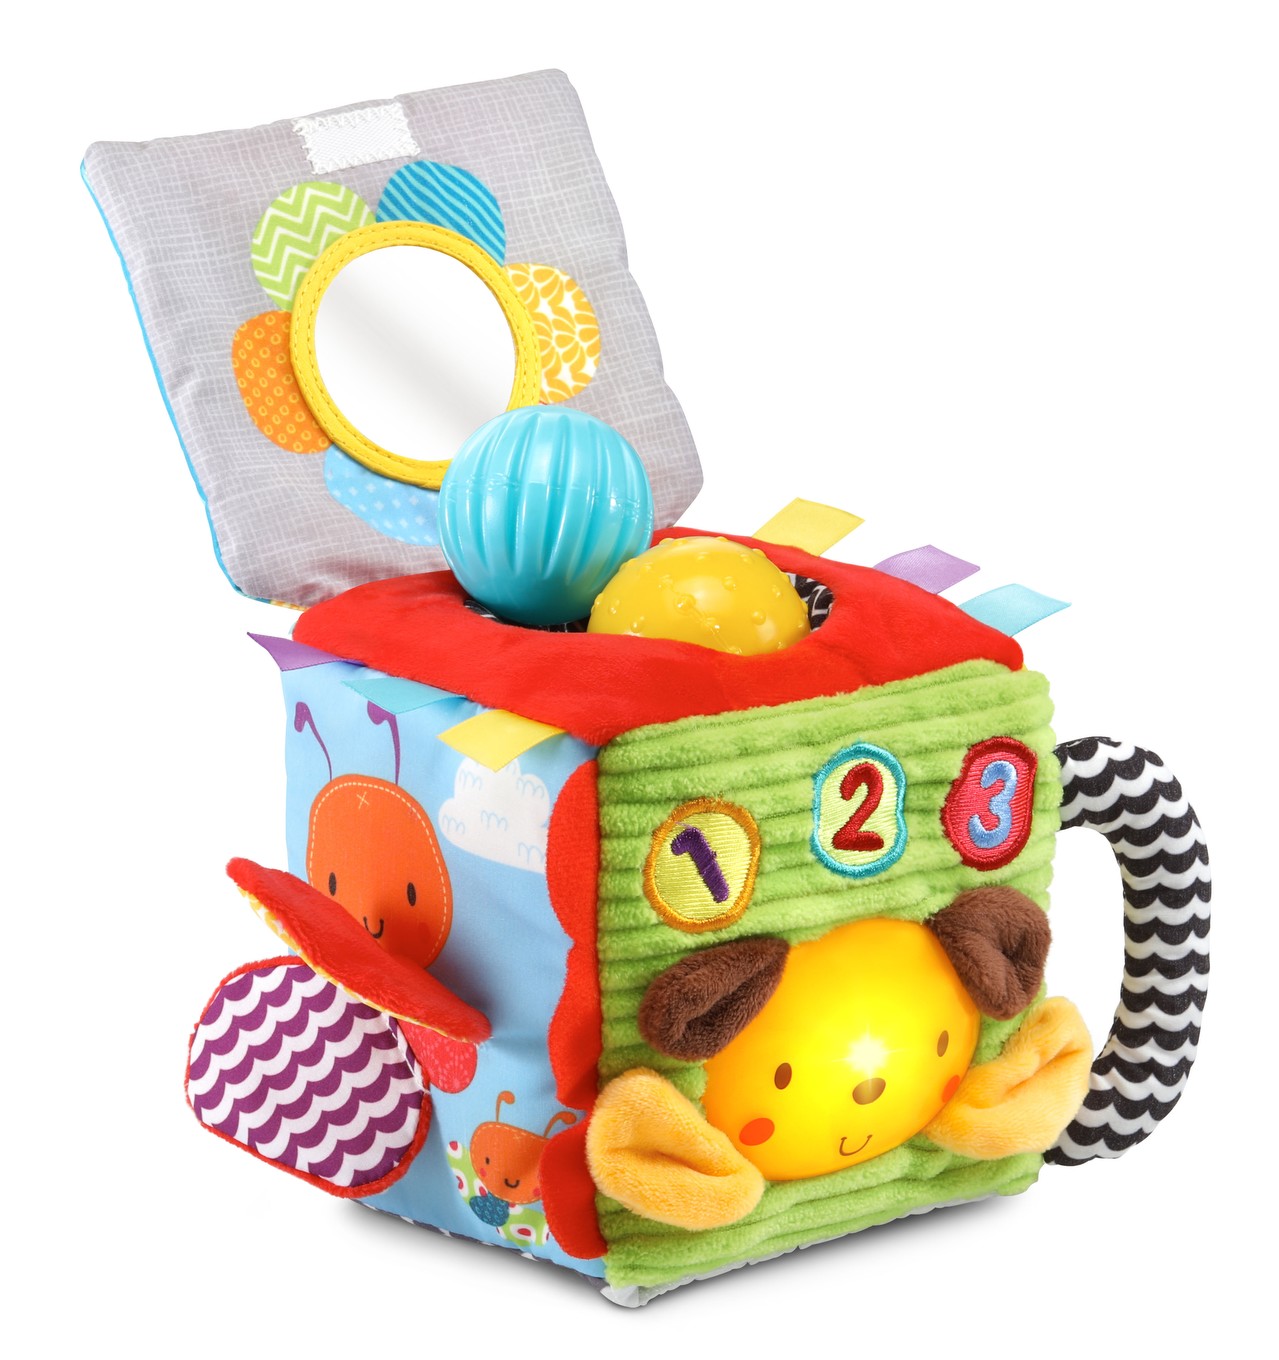 VTech, Soft and Smart Sensory Cube, Put-and-Take Ball Play, Baby Toy